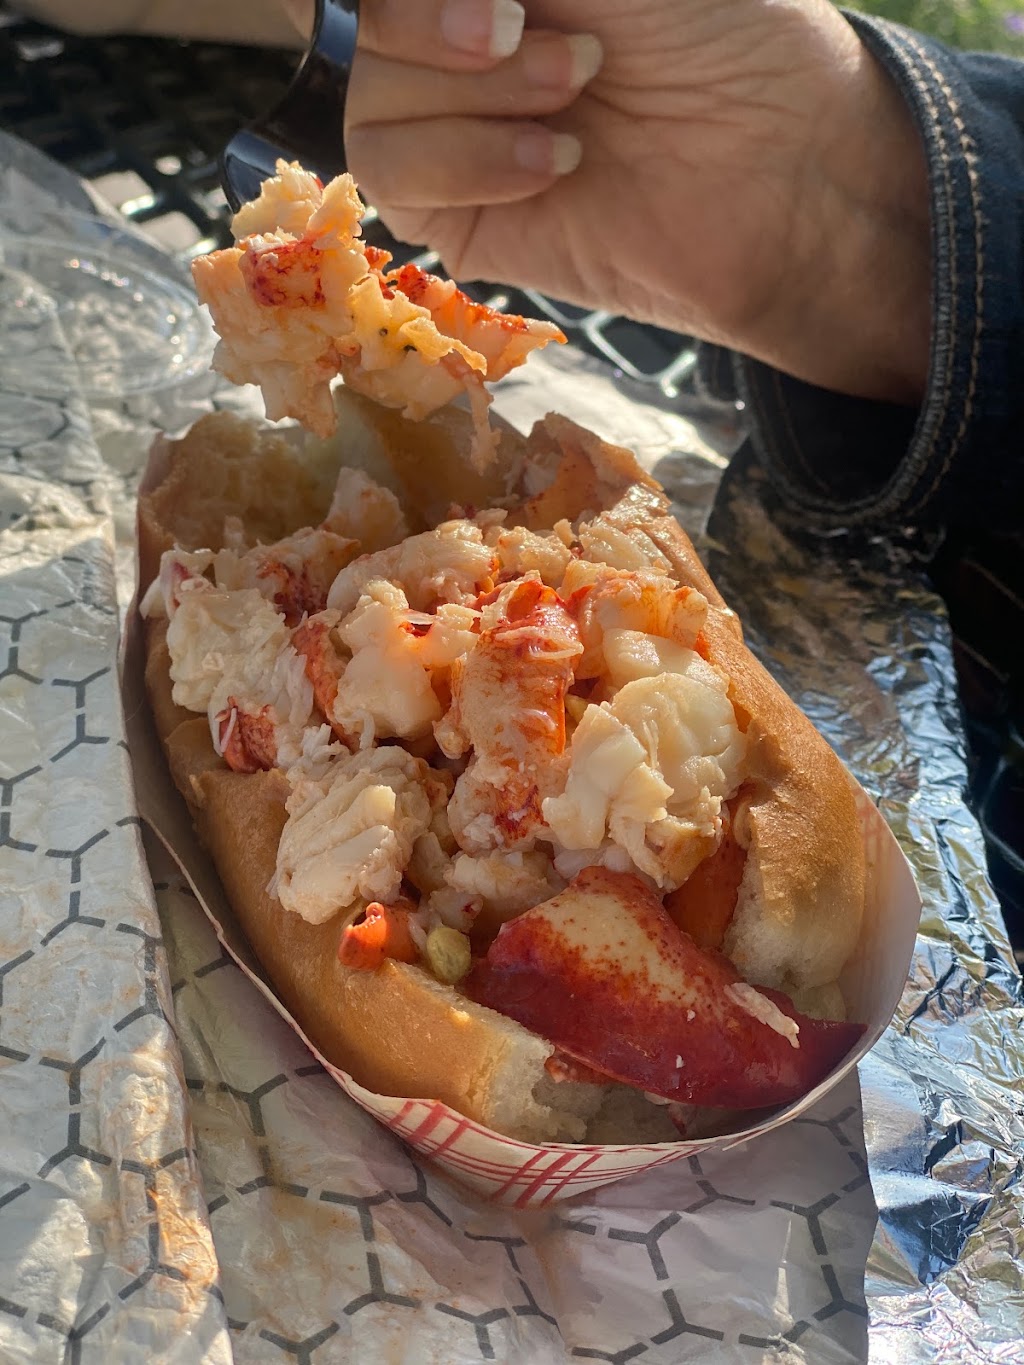 Livs Dockside Grill - Lobster Rolls and more | 68 Cedar Island Ave, Clinton, CT 06413 | Phone: (860) 664-5294